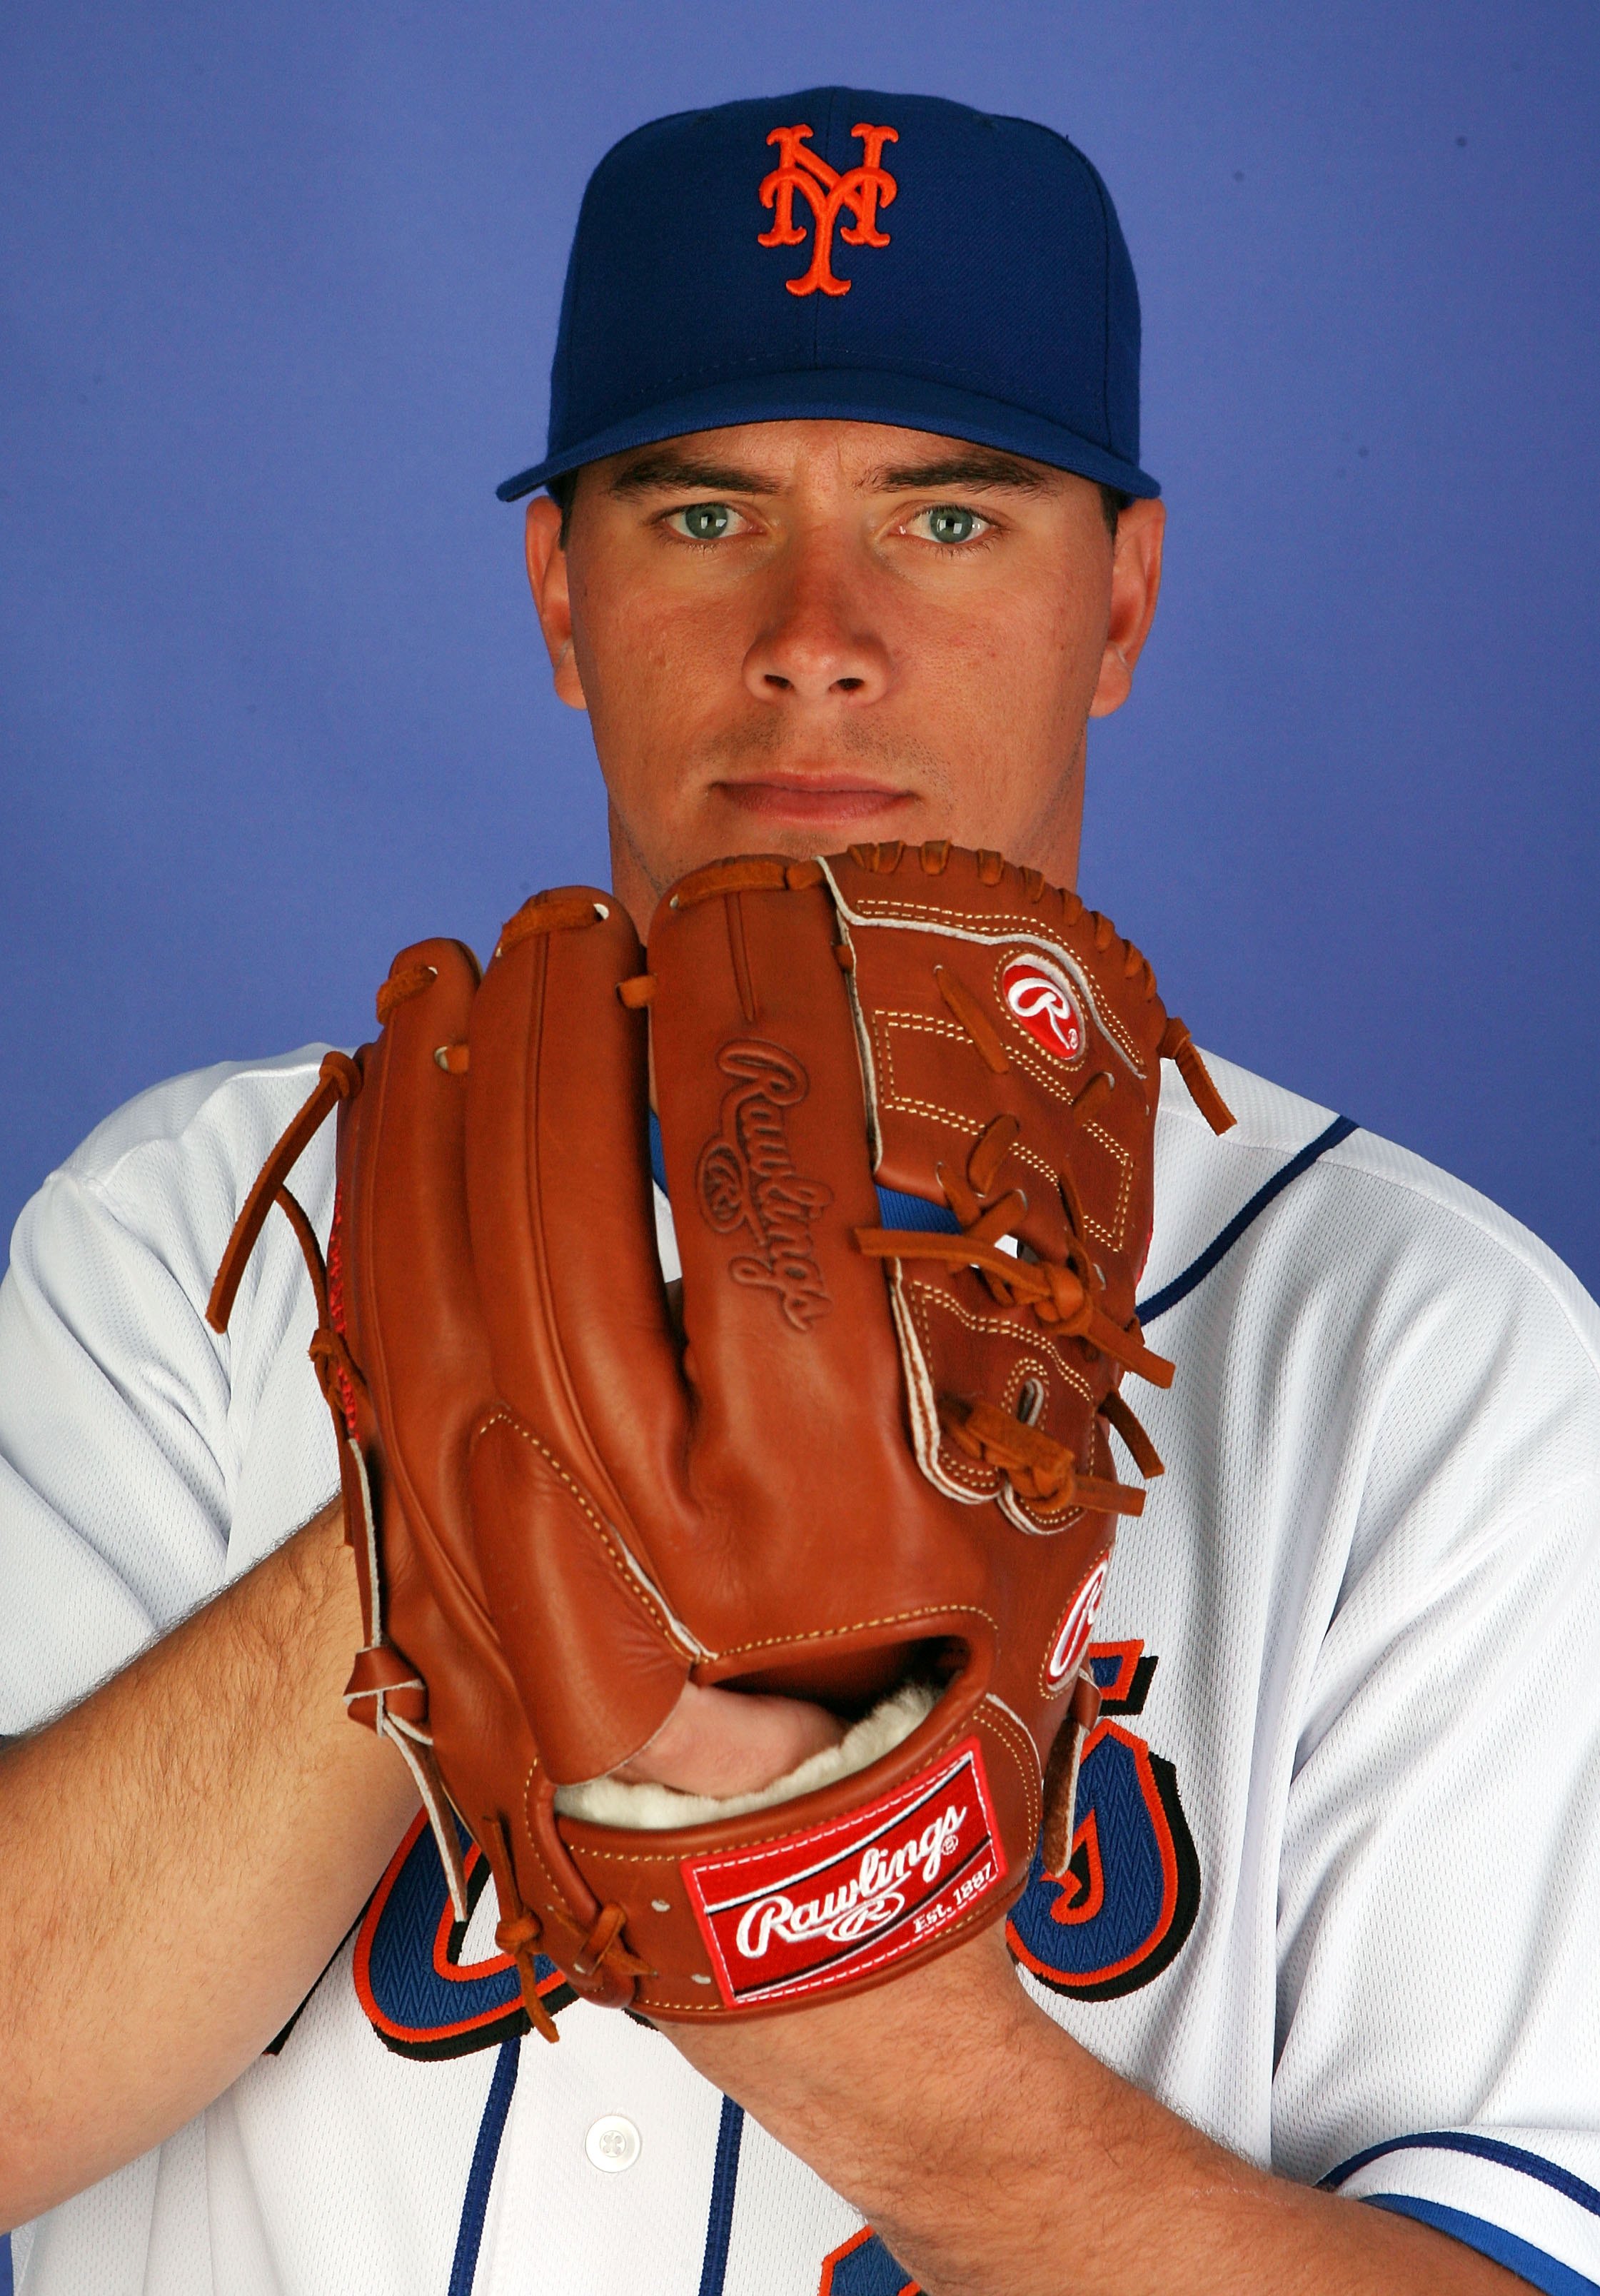 PORT ST. LUCIE, FL - FEBRUARY 27:  Pitcher Tobi Stoner #29 of the New York Mets poses during photo day at Tradition Field on February 27, 2010 in Port St. Lucie, Florida.  (Photo by Doug Benc/Getty Images)